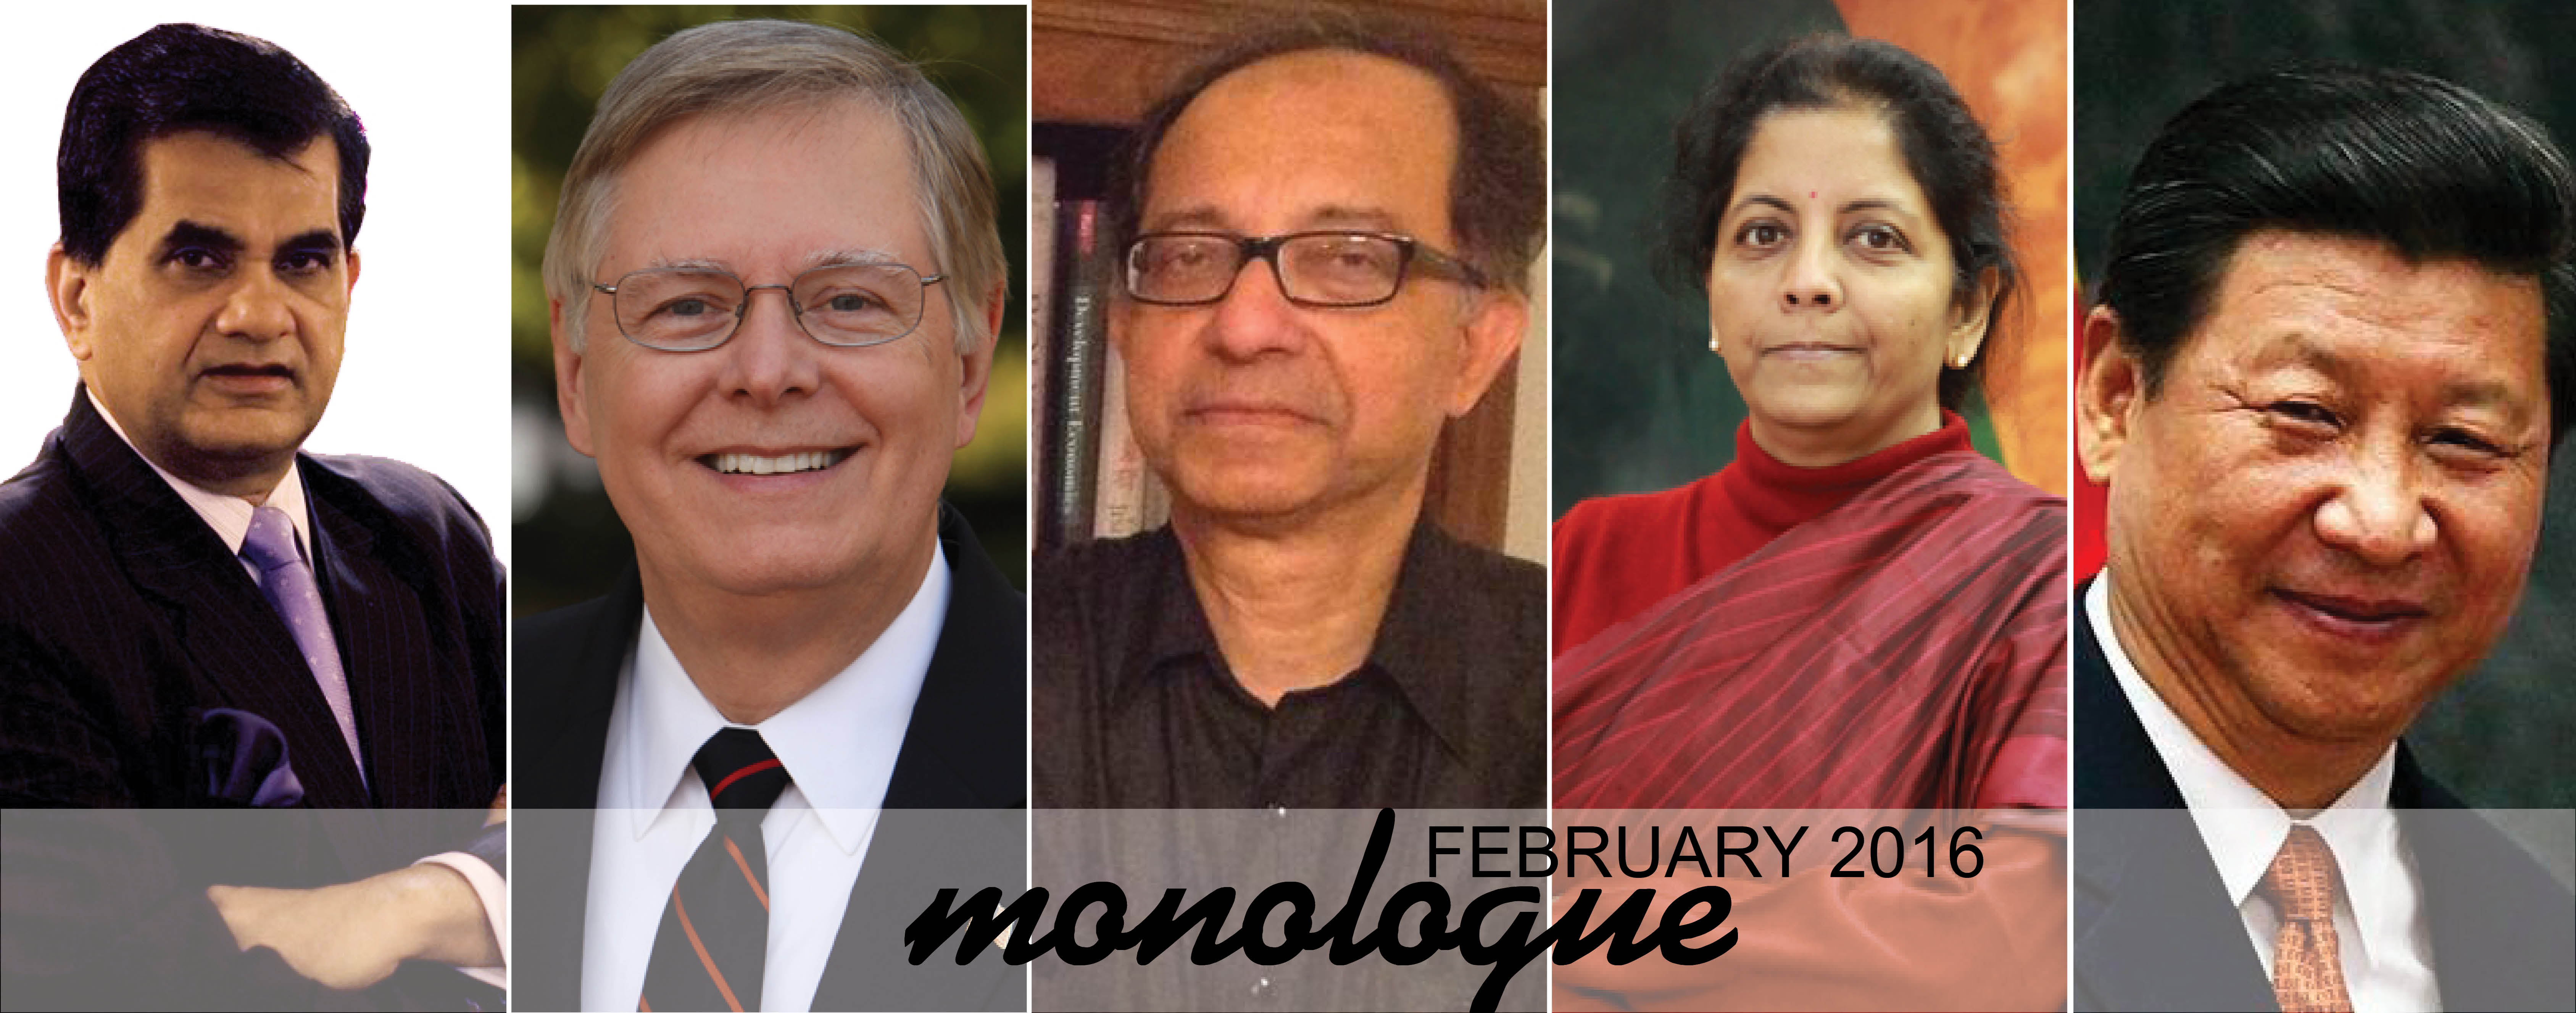 Monologue - People Speak – February 2016 March 2018 issue